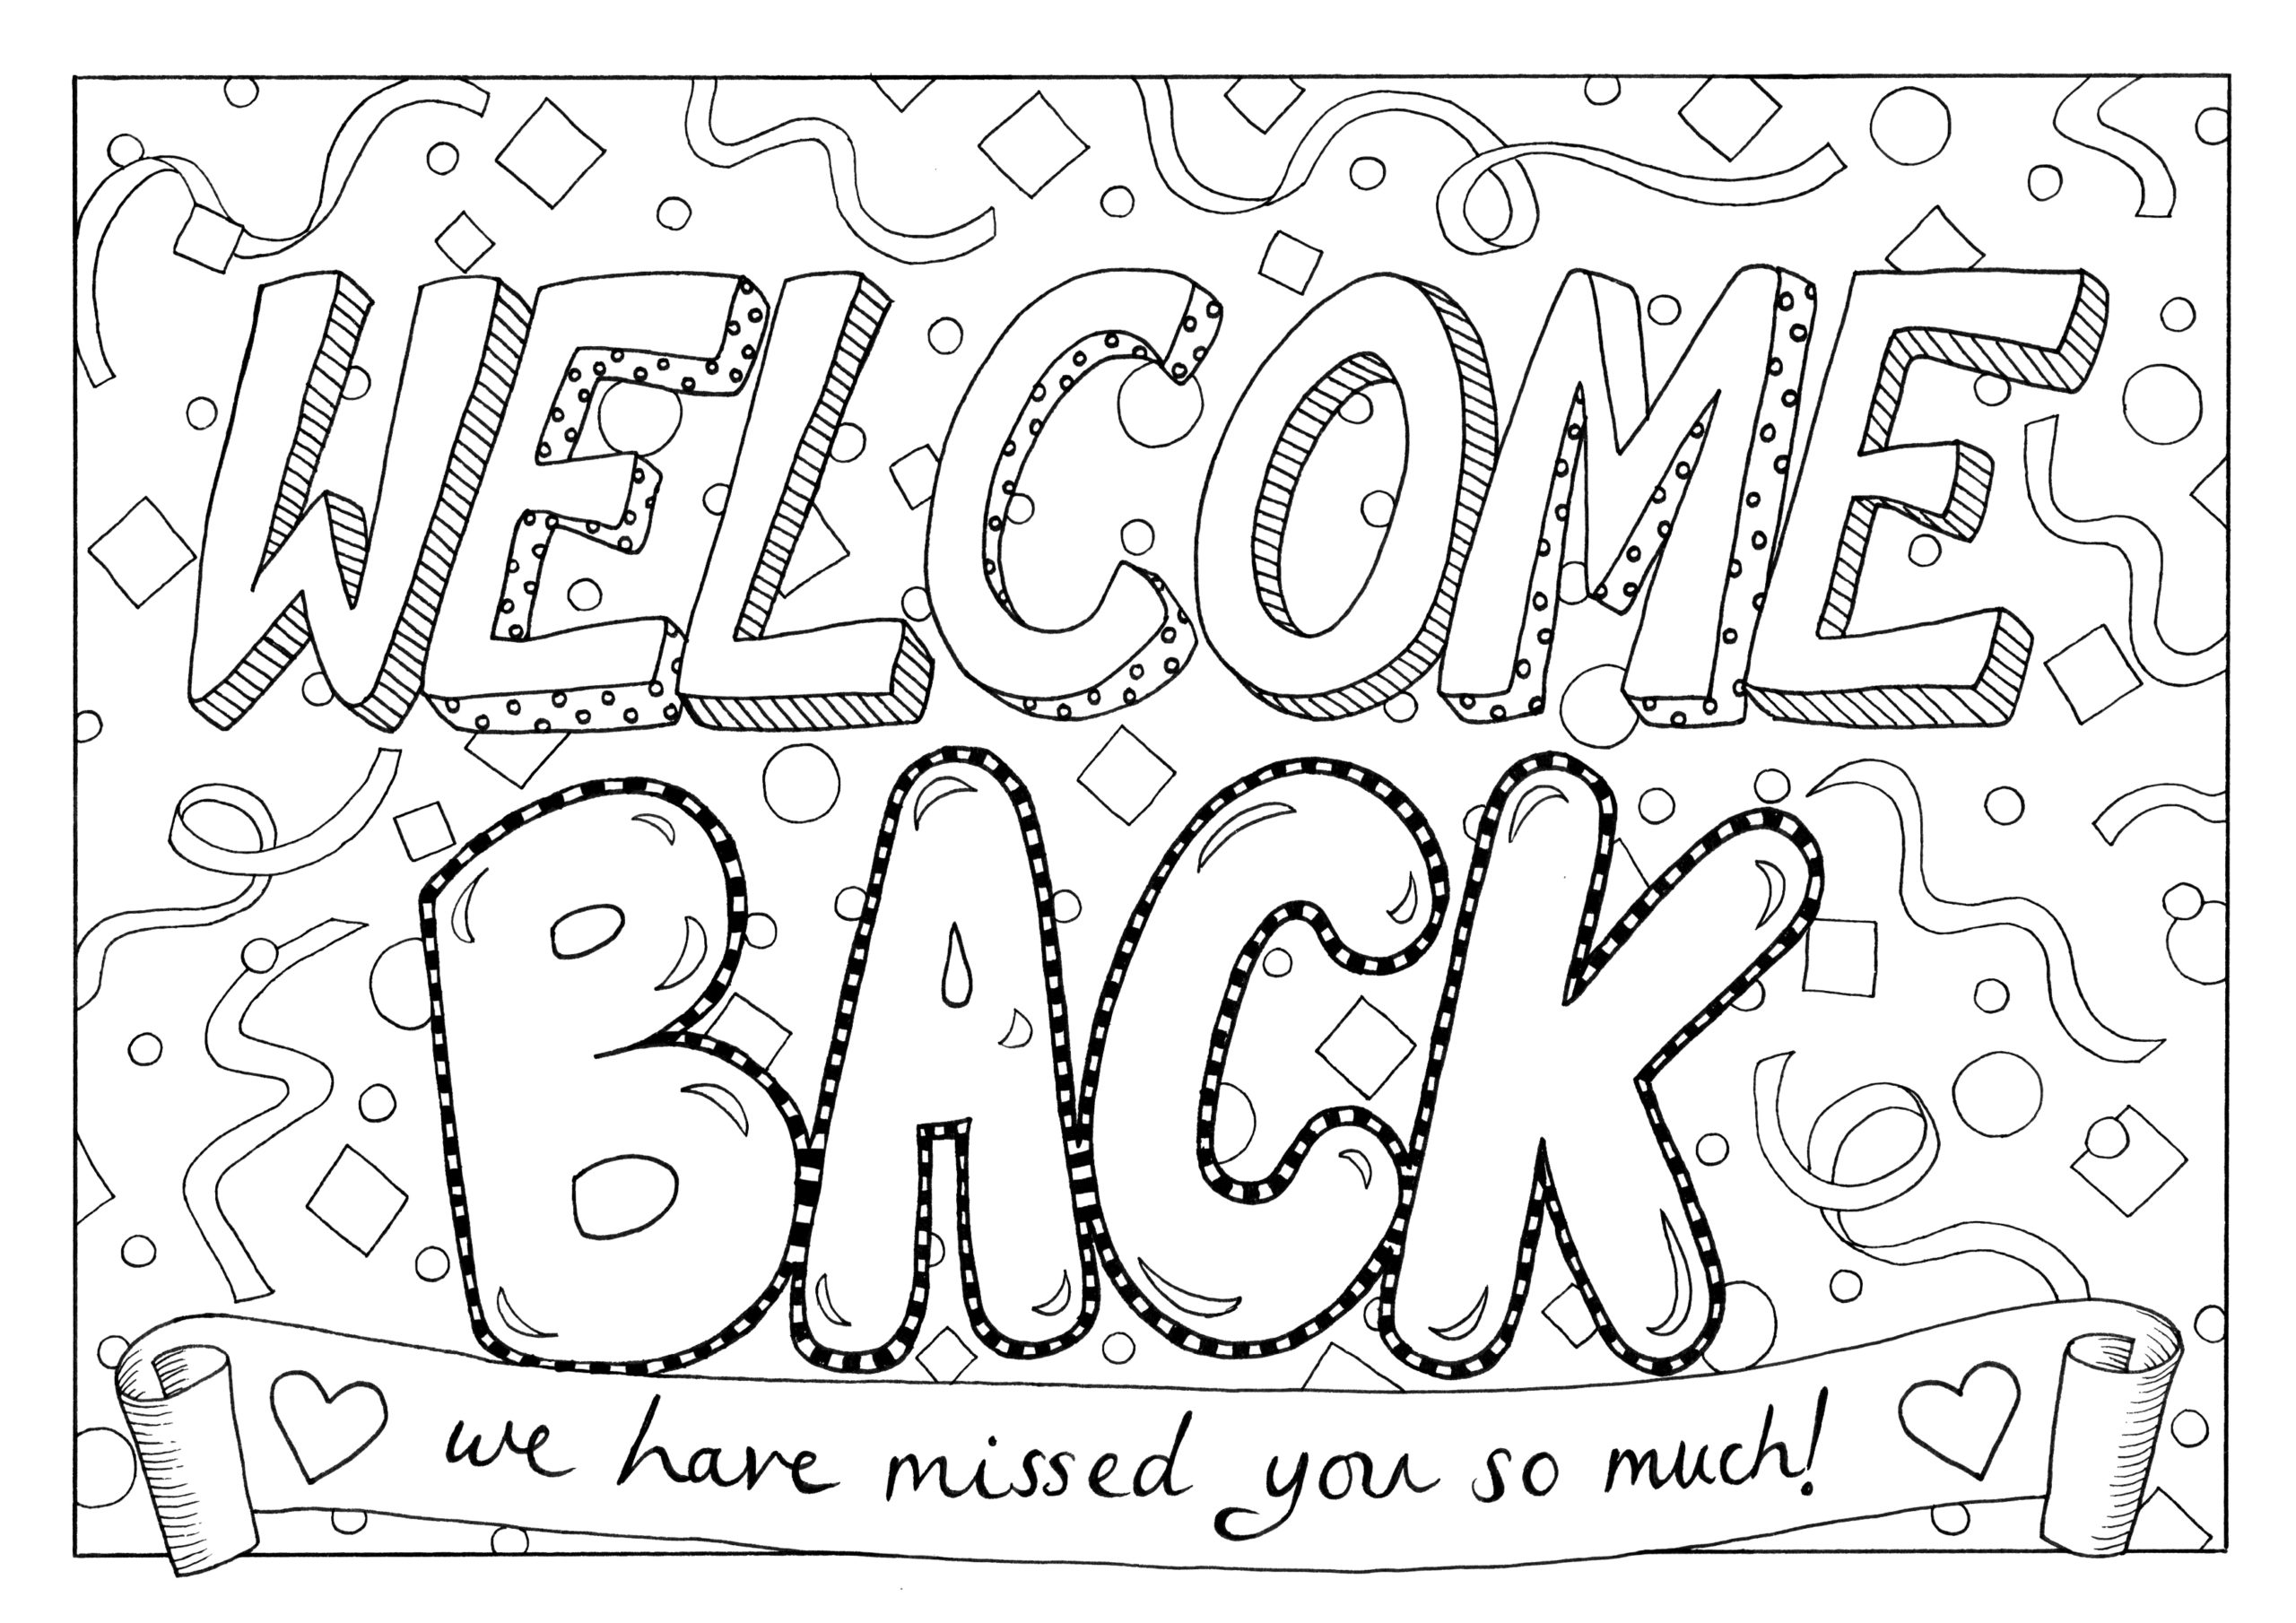 A hand lettered colouring page poster with ‘welcome back’ written in decorative lettering, an unfurling banner underneath has hearts on it and says ‘we have missed you so much!’. In the background is a pattern of streamers and confetti